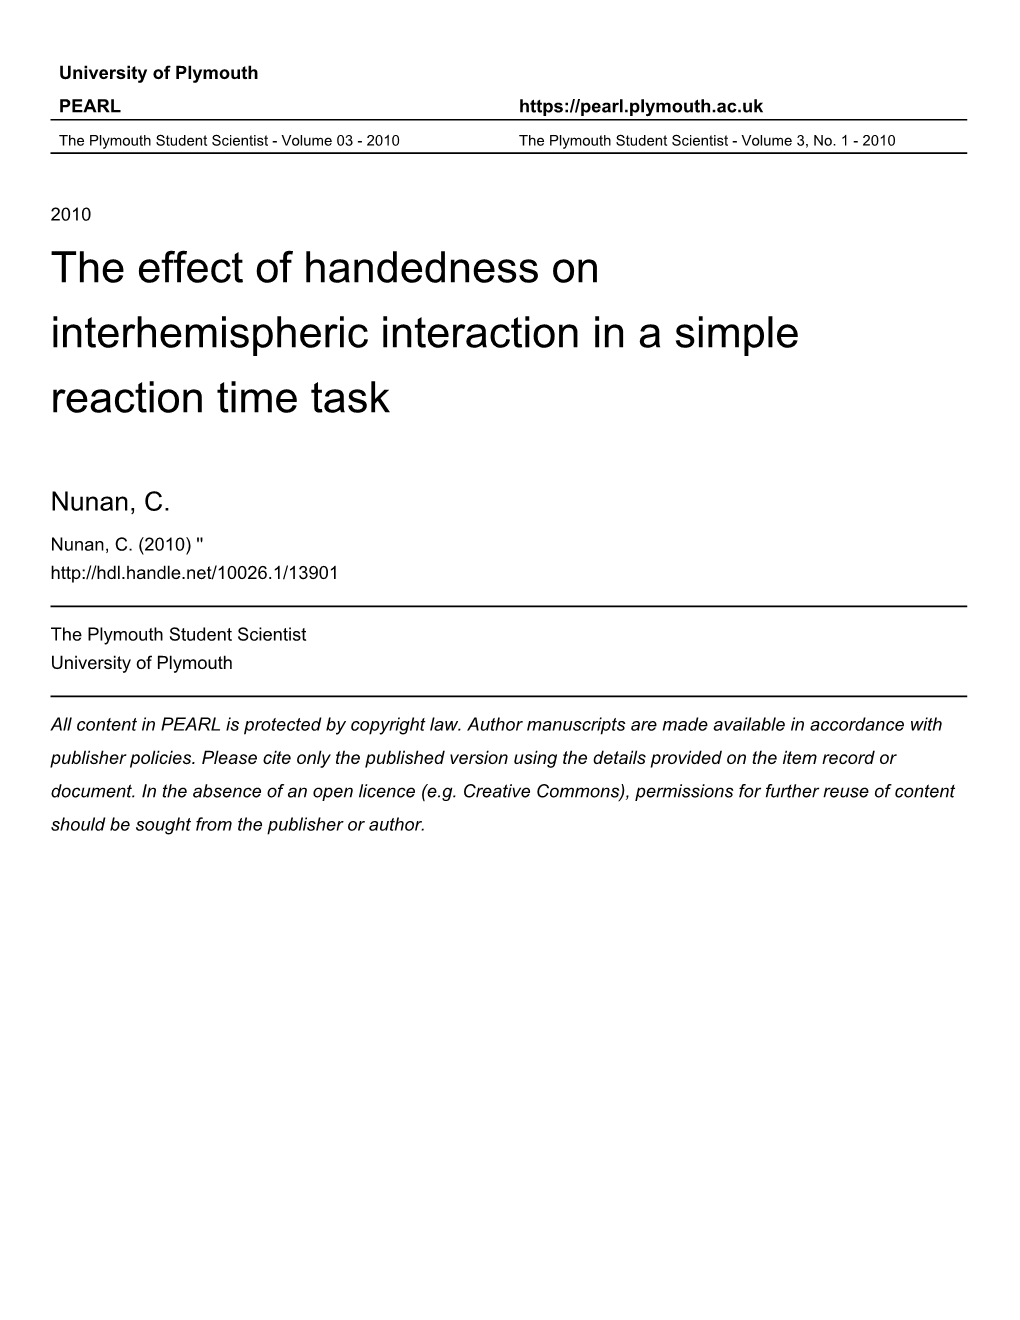 The Effect of Handedness on Interhemispheric Interaction in a Simple Reaction Time Task